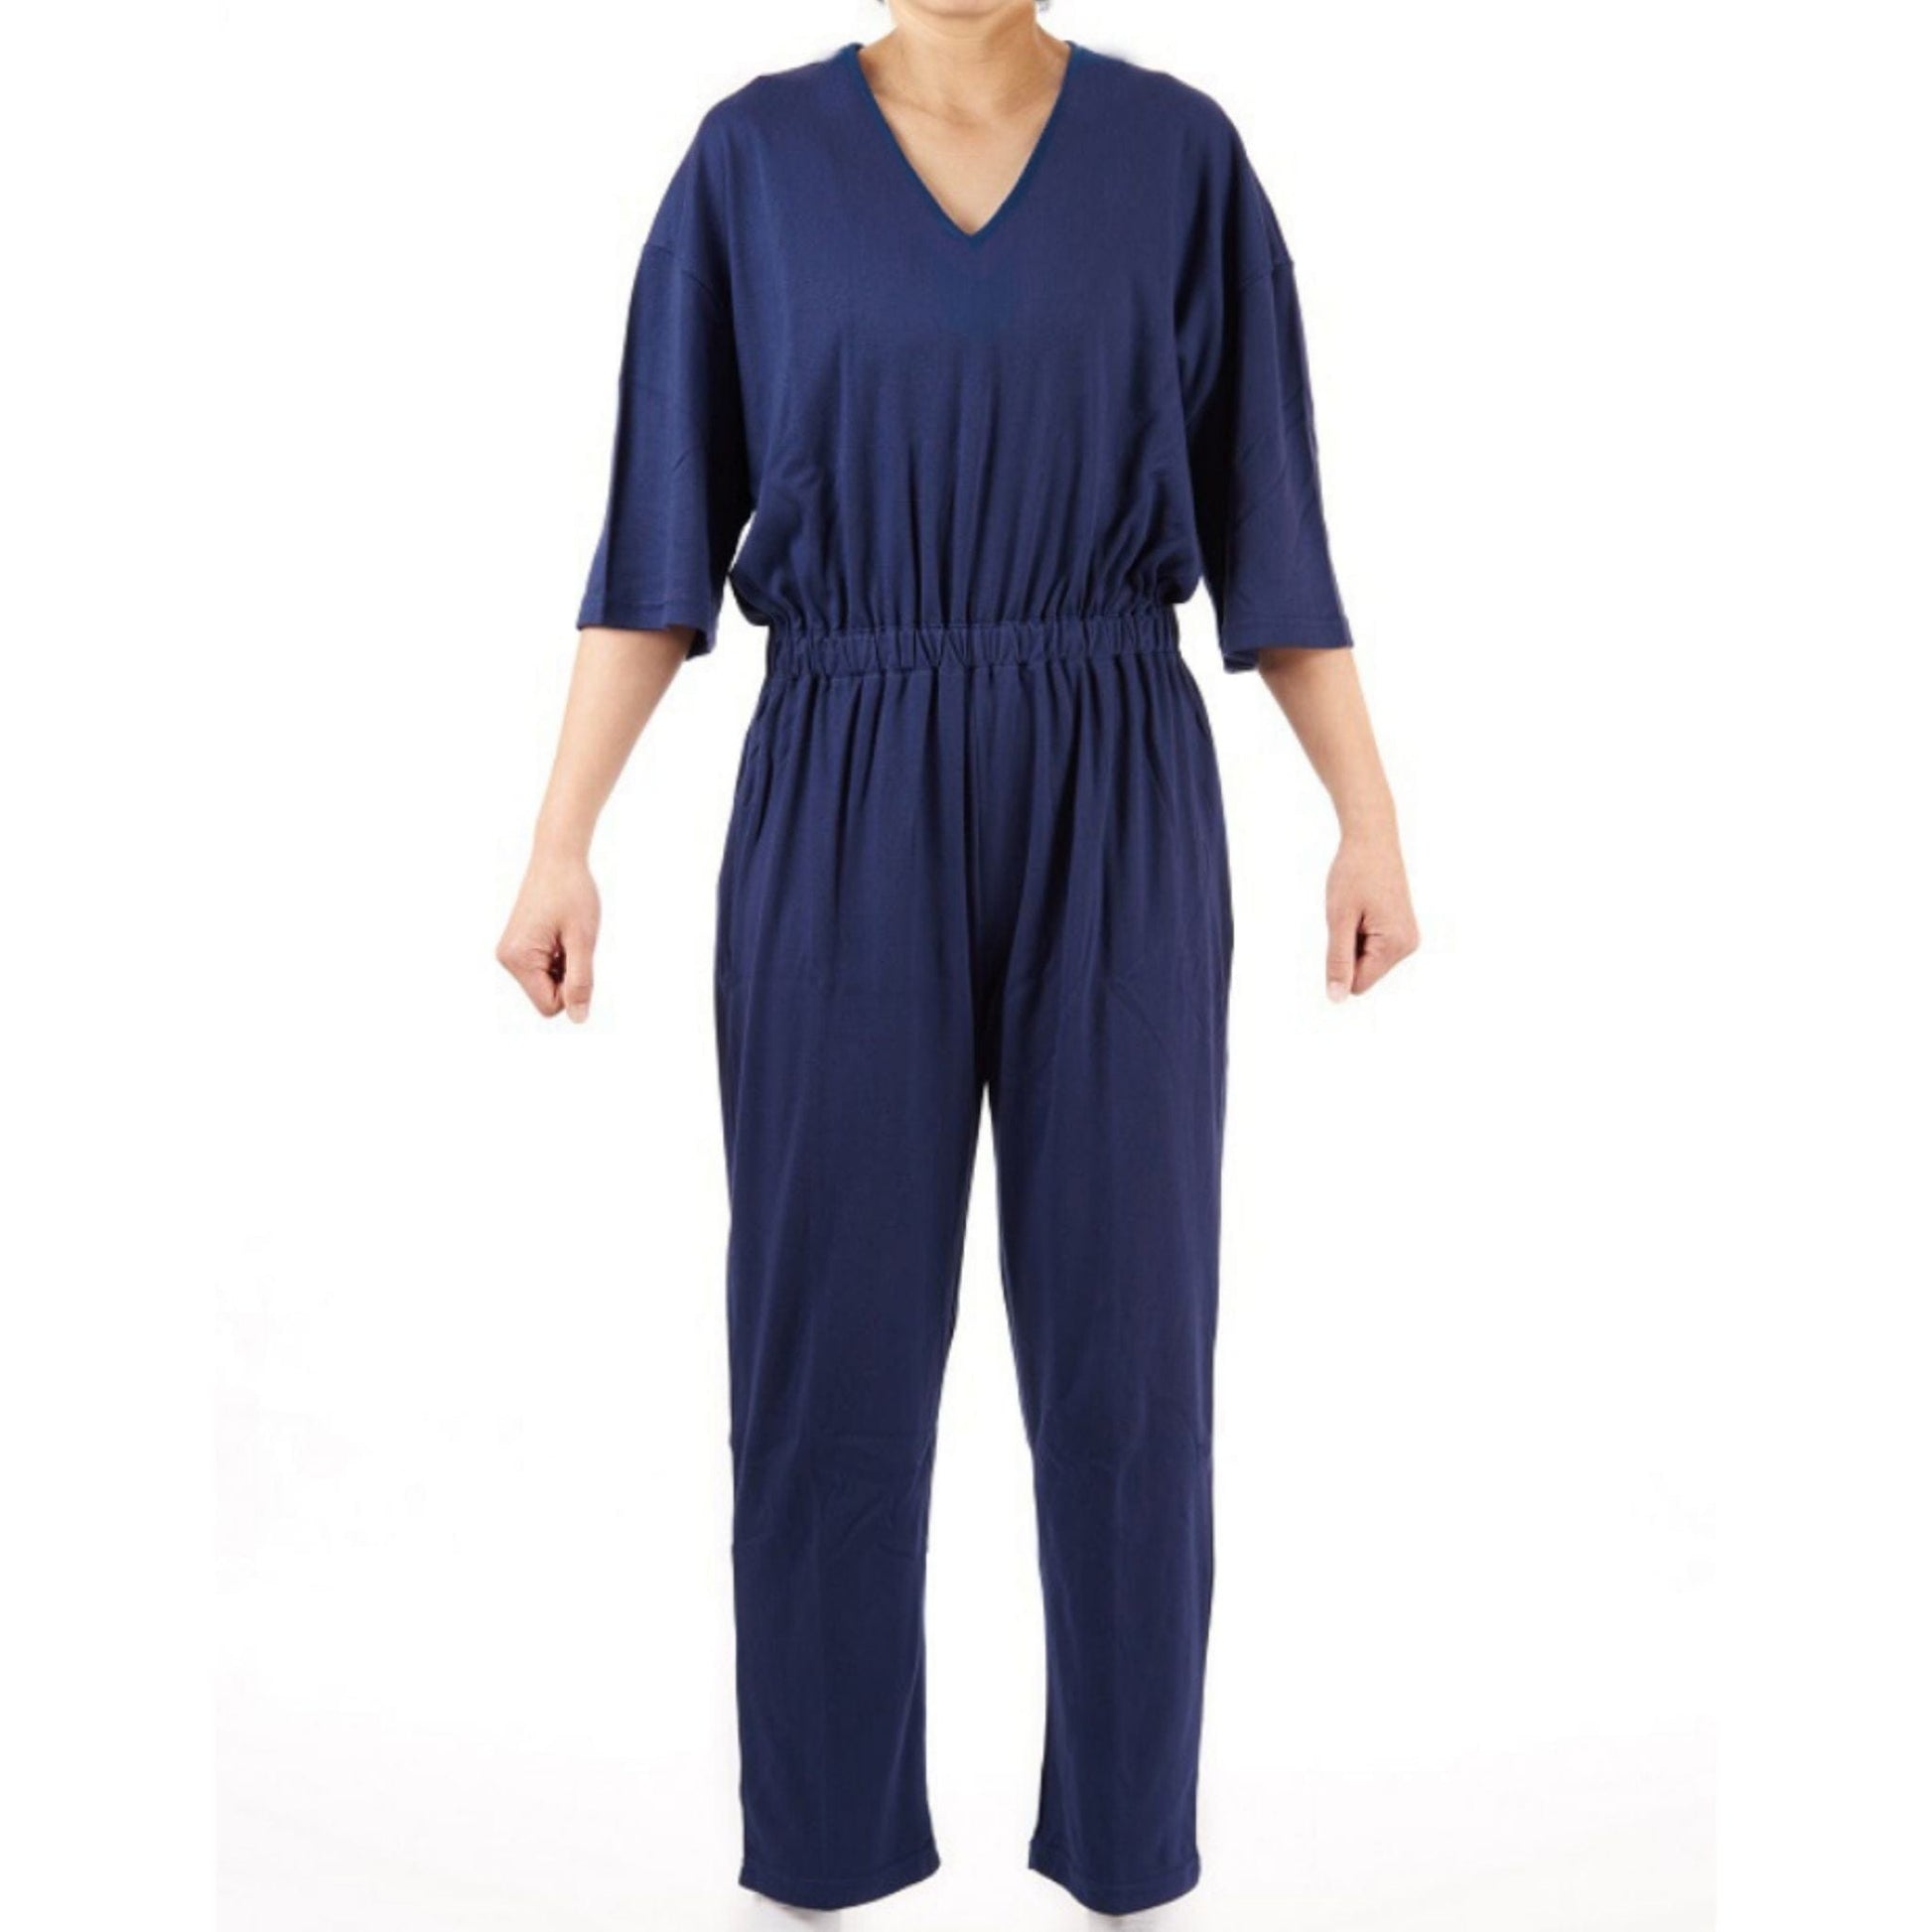 CC Men's Night Jumpsuit with Short Sleeve - Small Only left-Sale - Caring Clothing